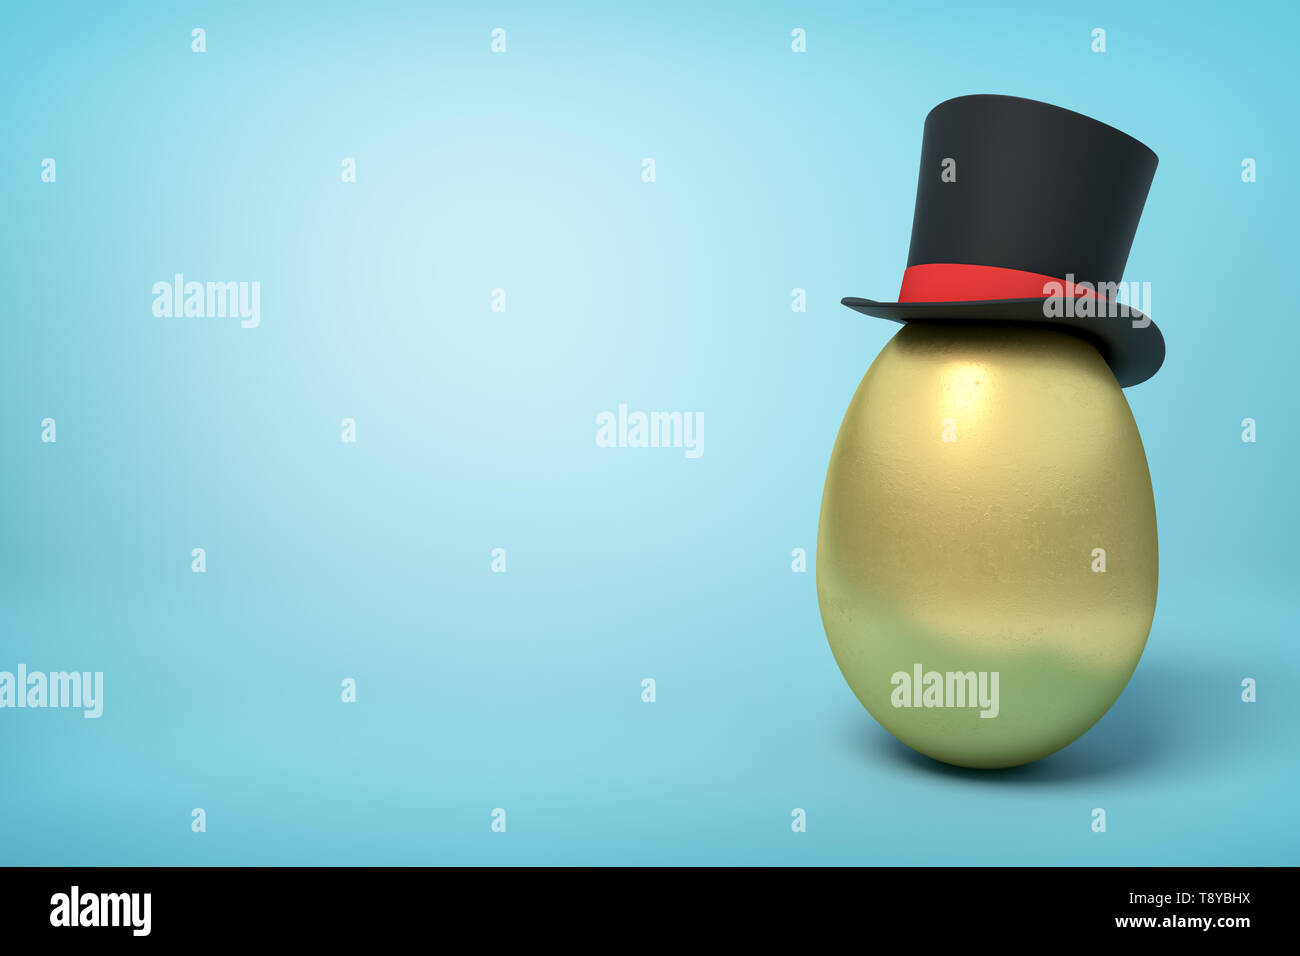 3d rendering of golden egg wearing black tophat standing on the right with much copy space on the rest of light blue background. Stock Photo